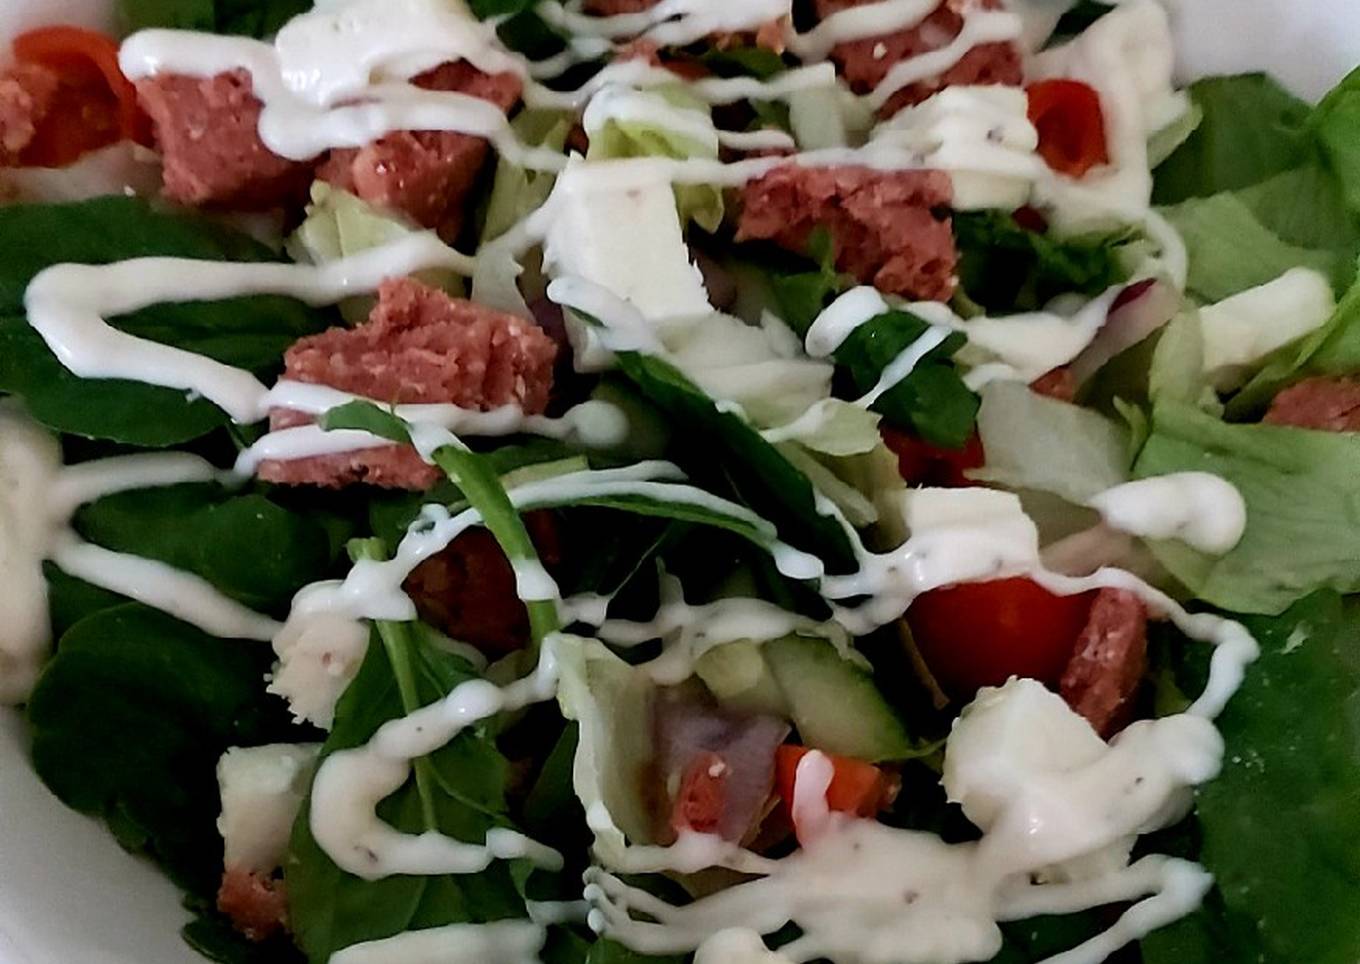 My Corned Beef & Spinach Salad